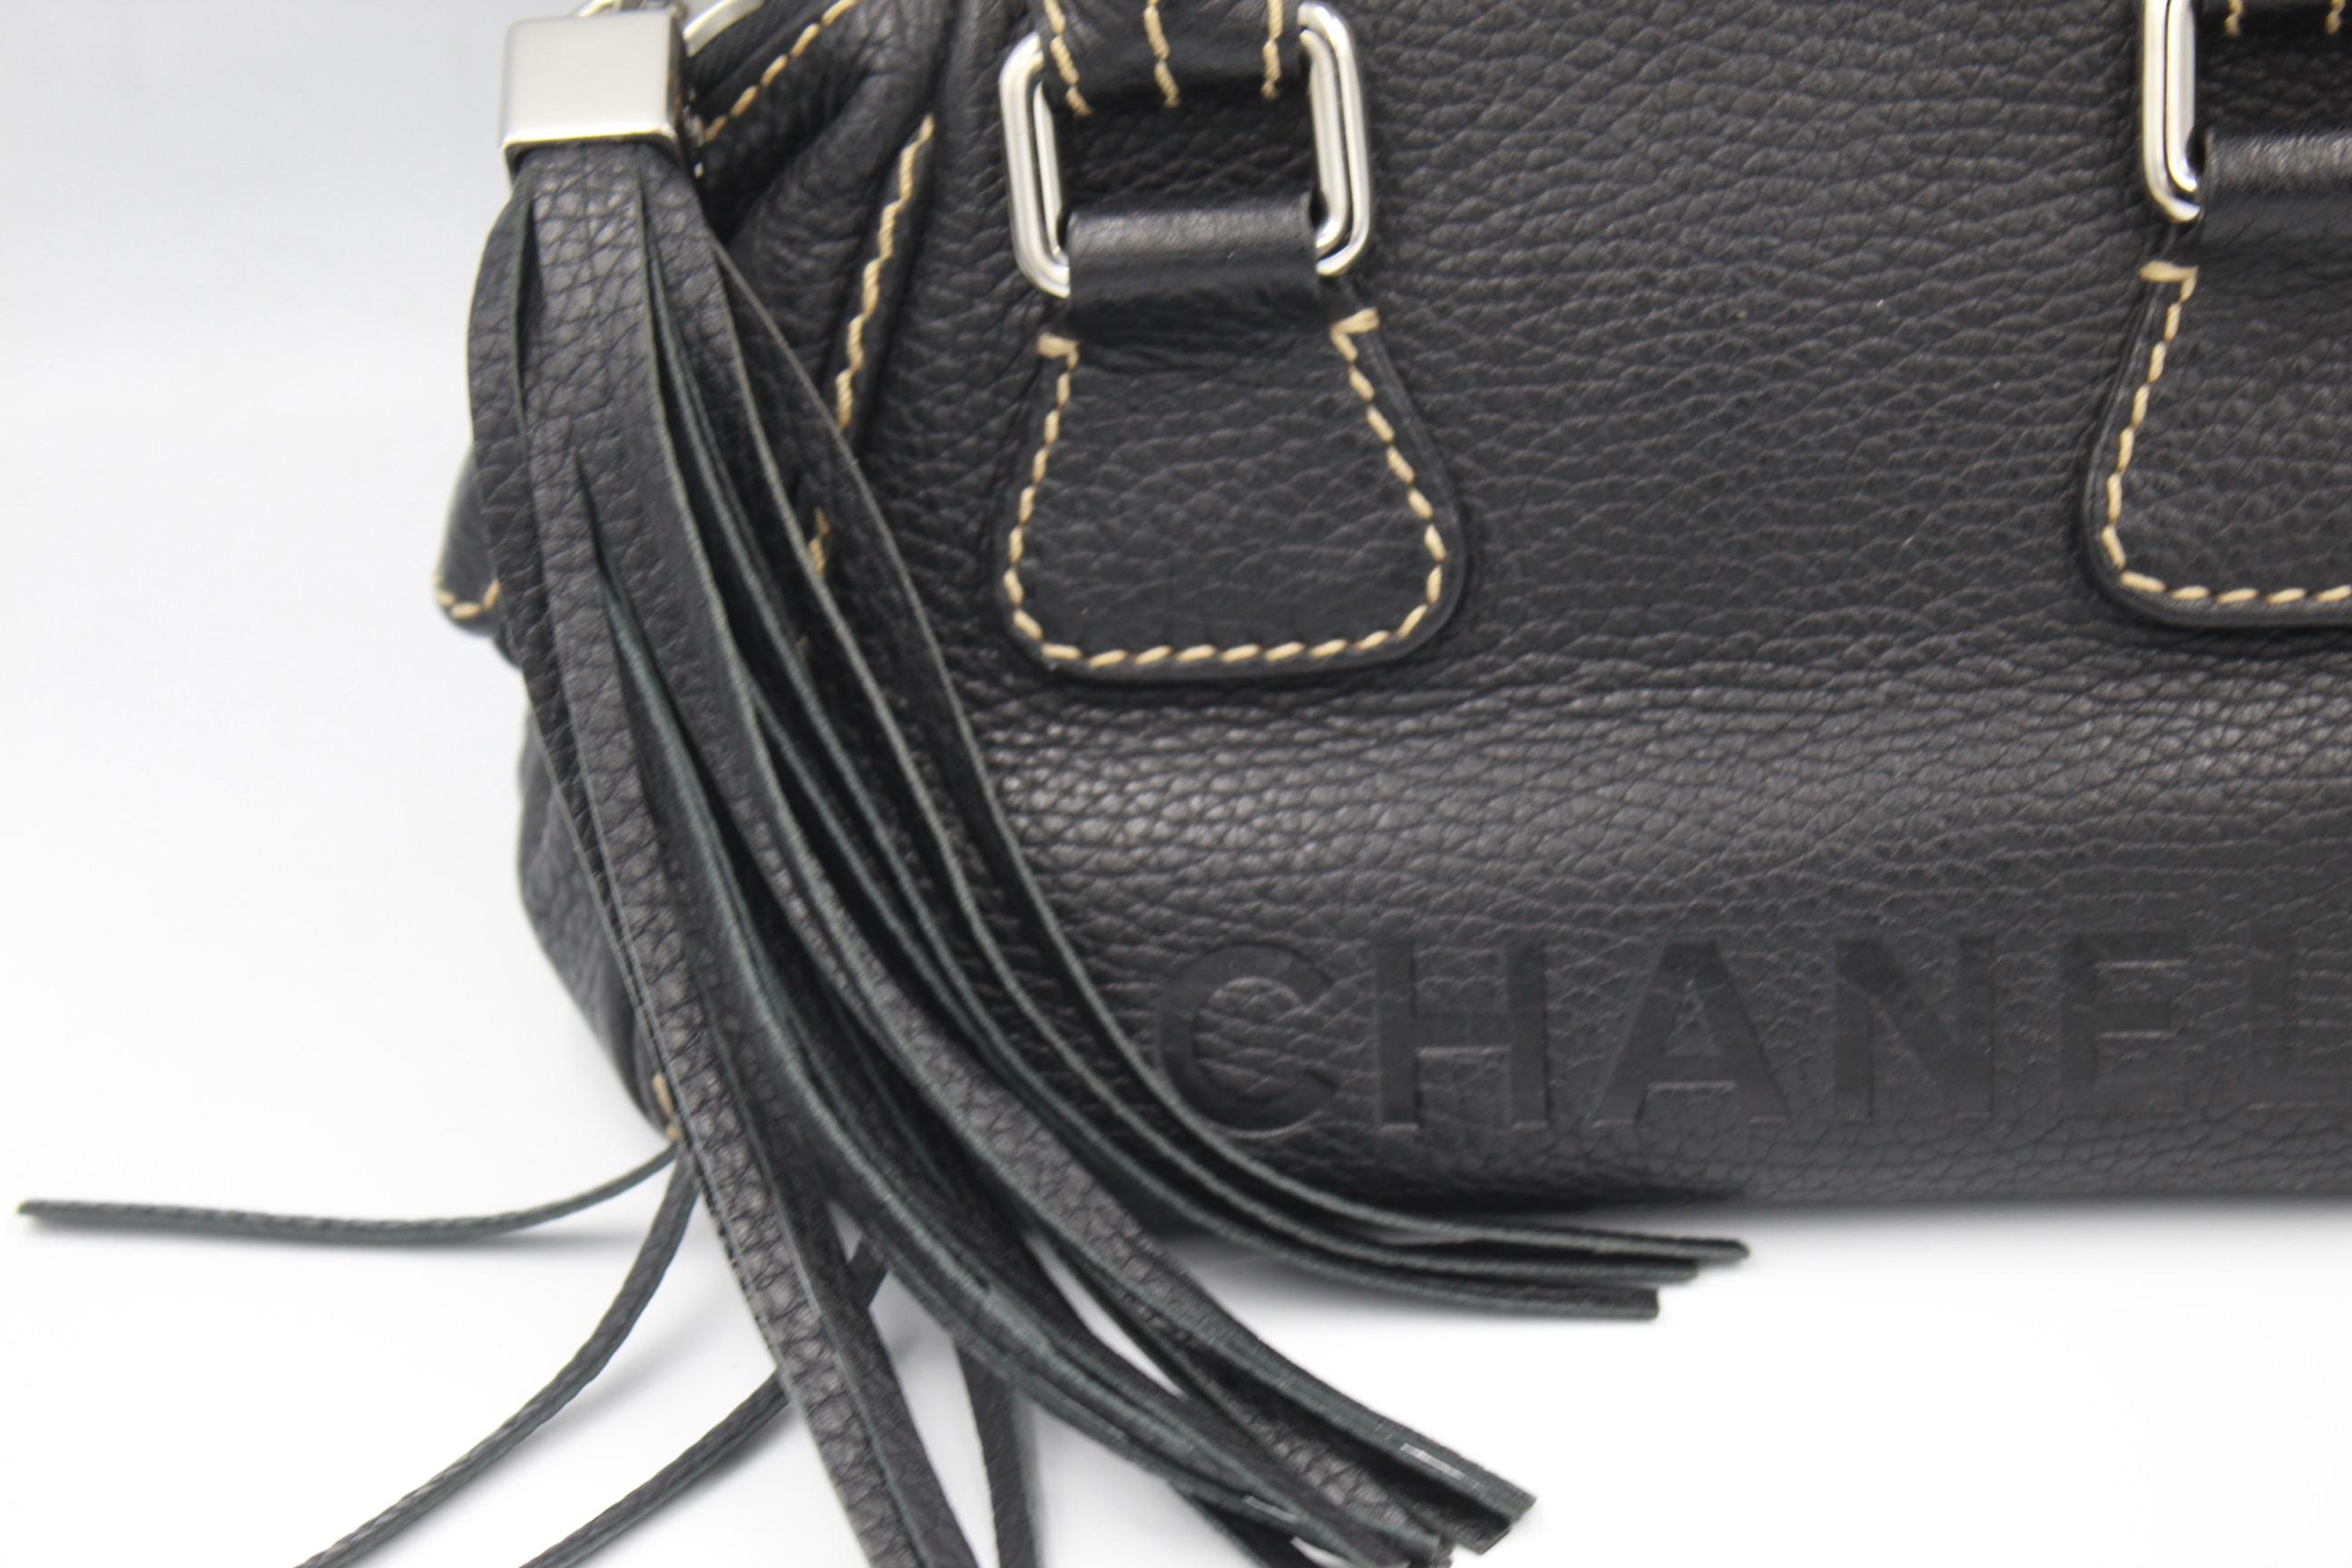 Small Chanel bag in grained leather and silver hardware.
Bag from 2003
To wear in the hand or an external strap could be added to the hardware.
Really good condition
Hologram but no card
Size 23x12,5 cm